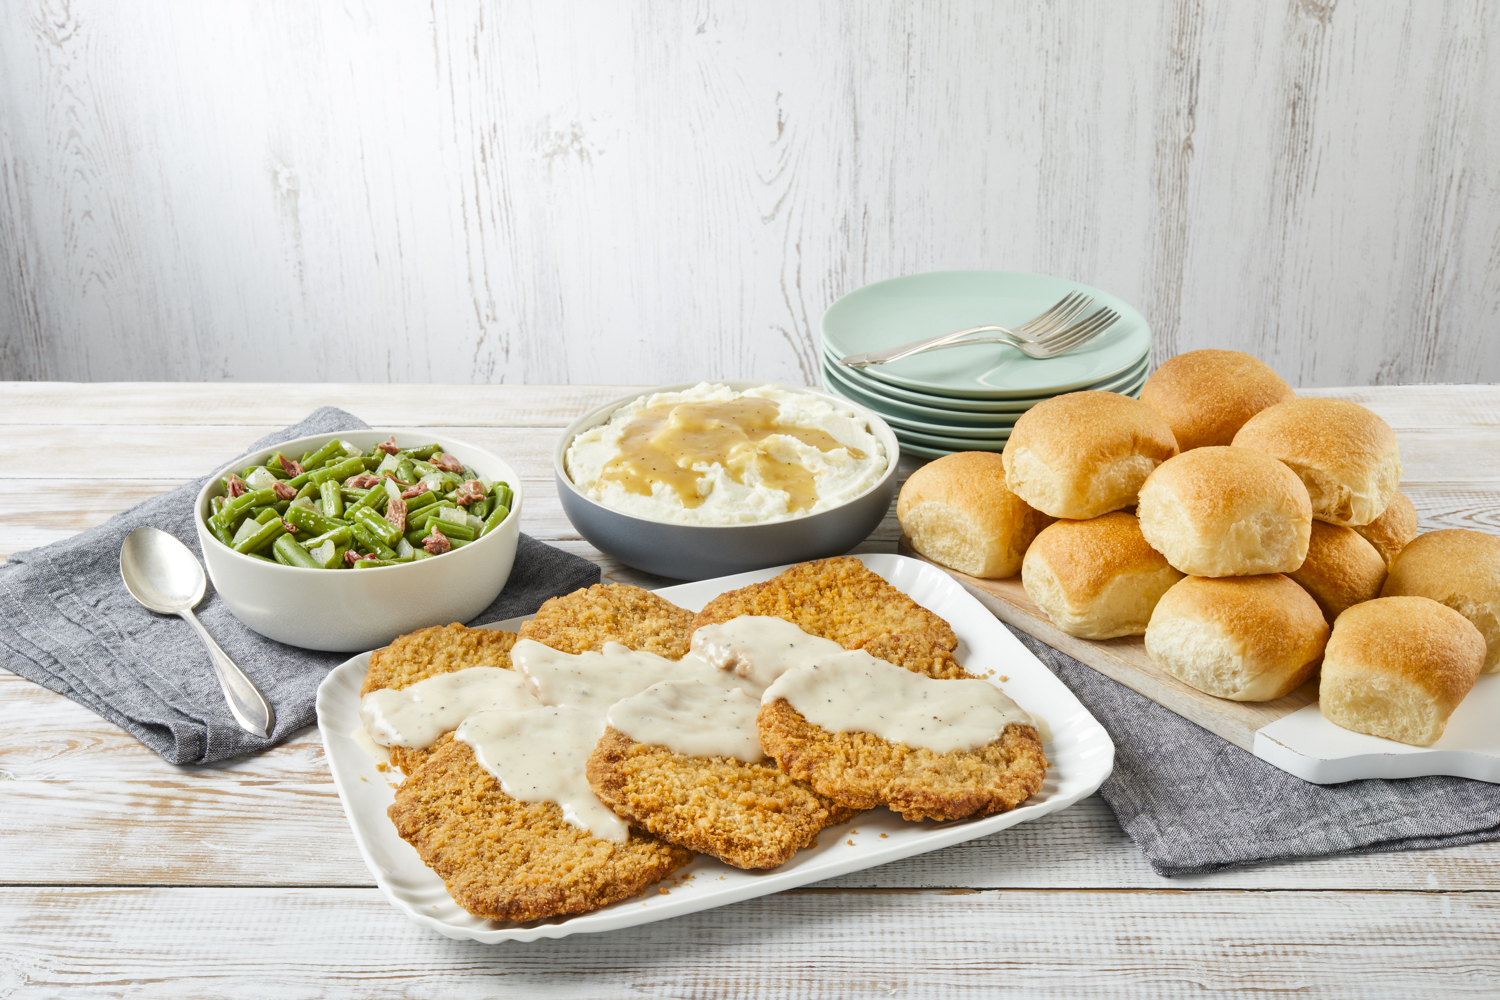 Bob Evans Family Meals To Go l Family Style I Takeout & Delivery l